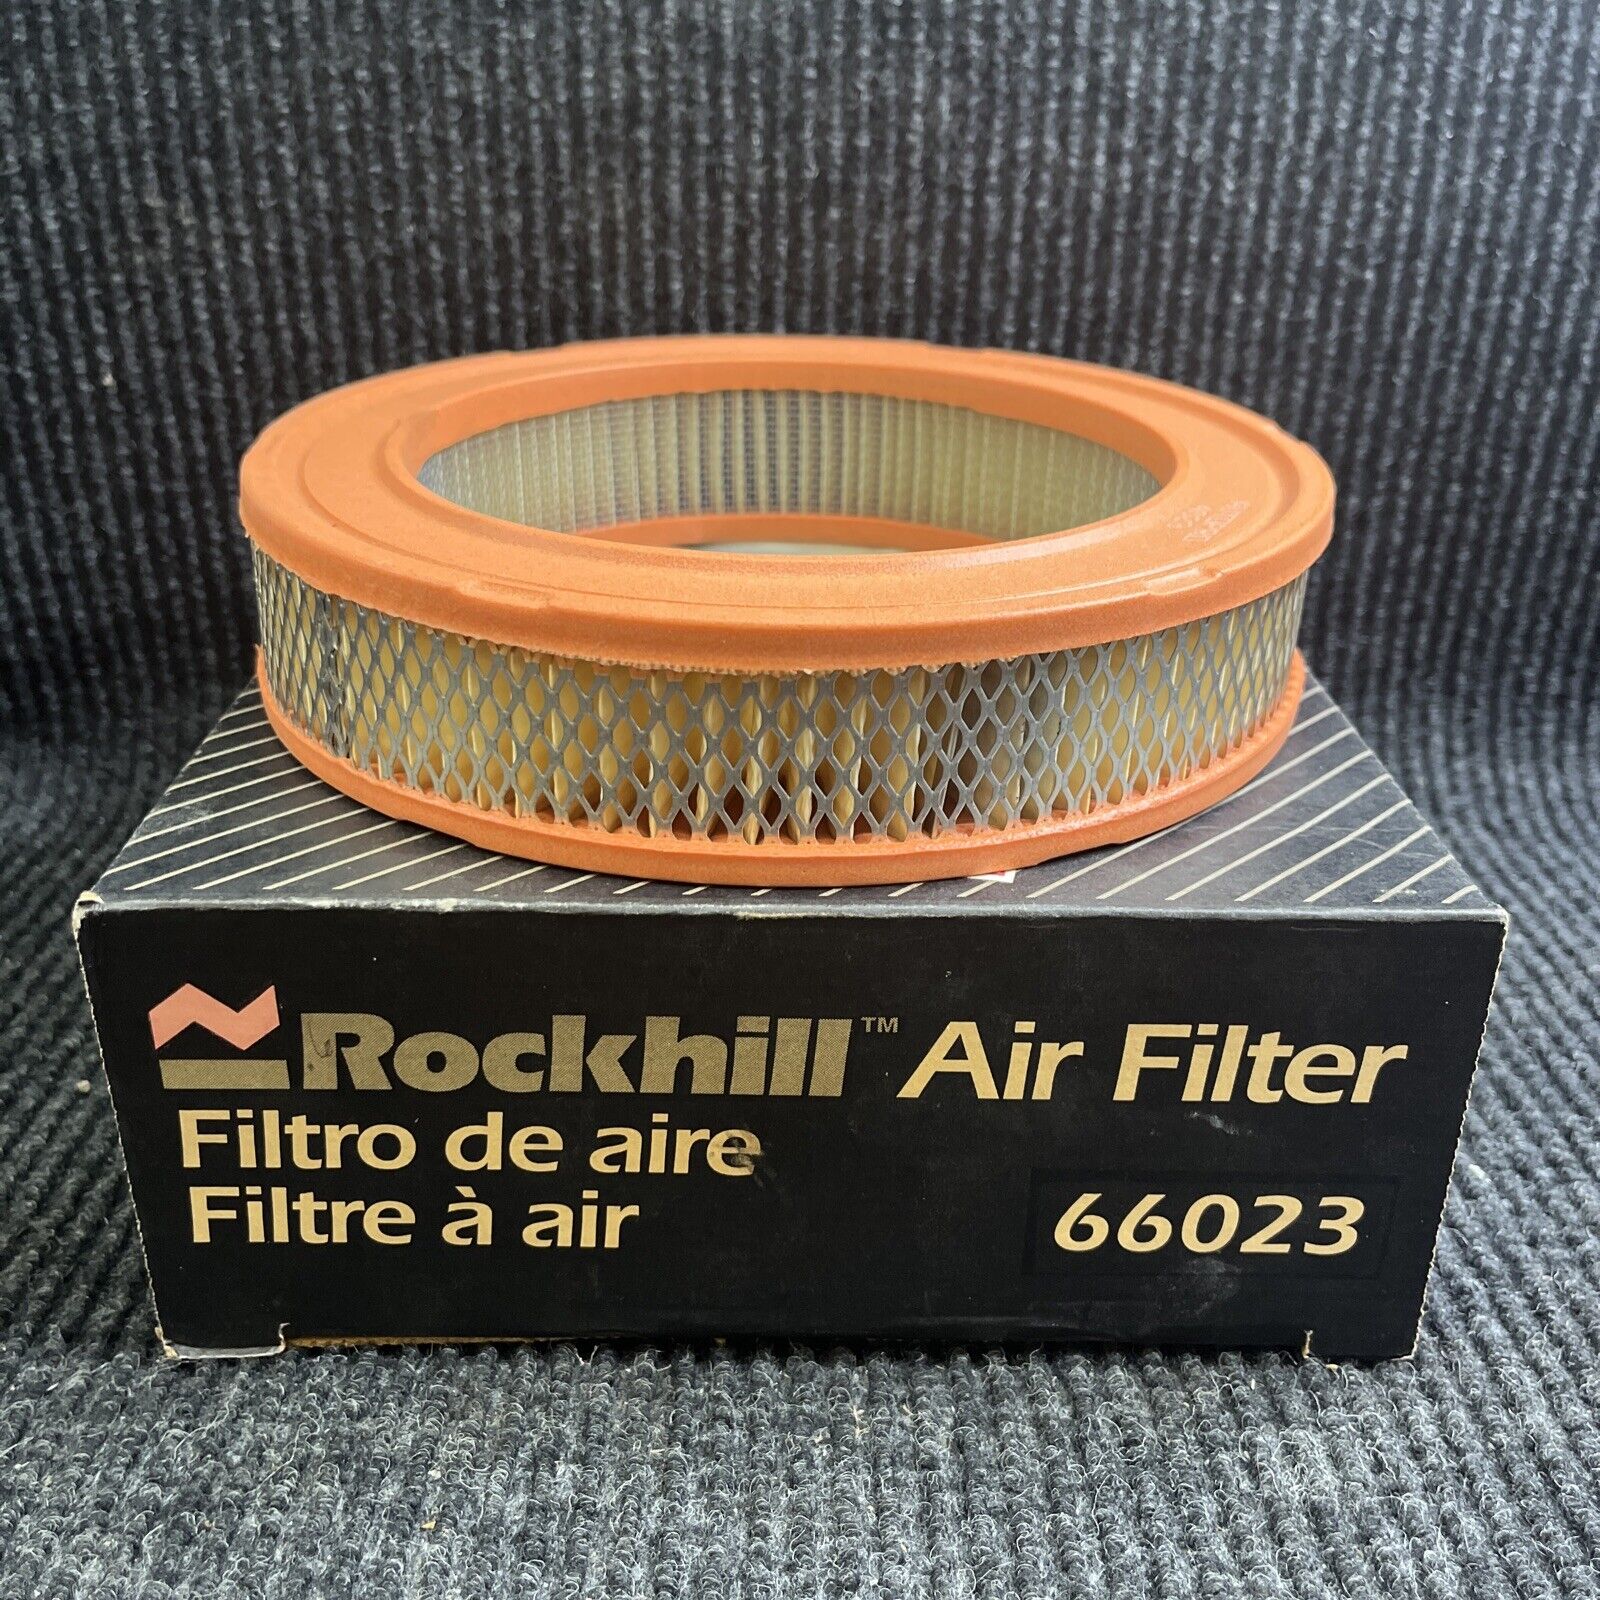 🔥🔥🔥Rock hill Air Filter for 1988-1989 Festiva 66023 Replaced WIX 46023